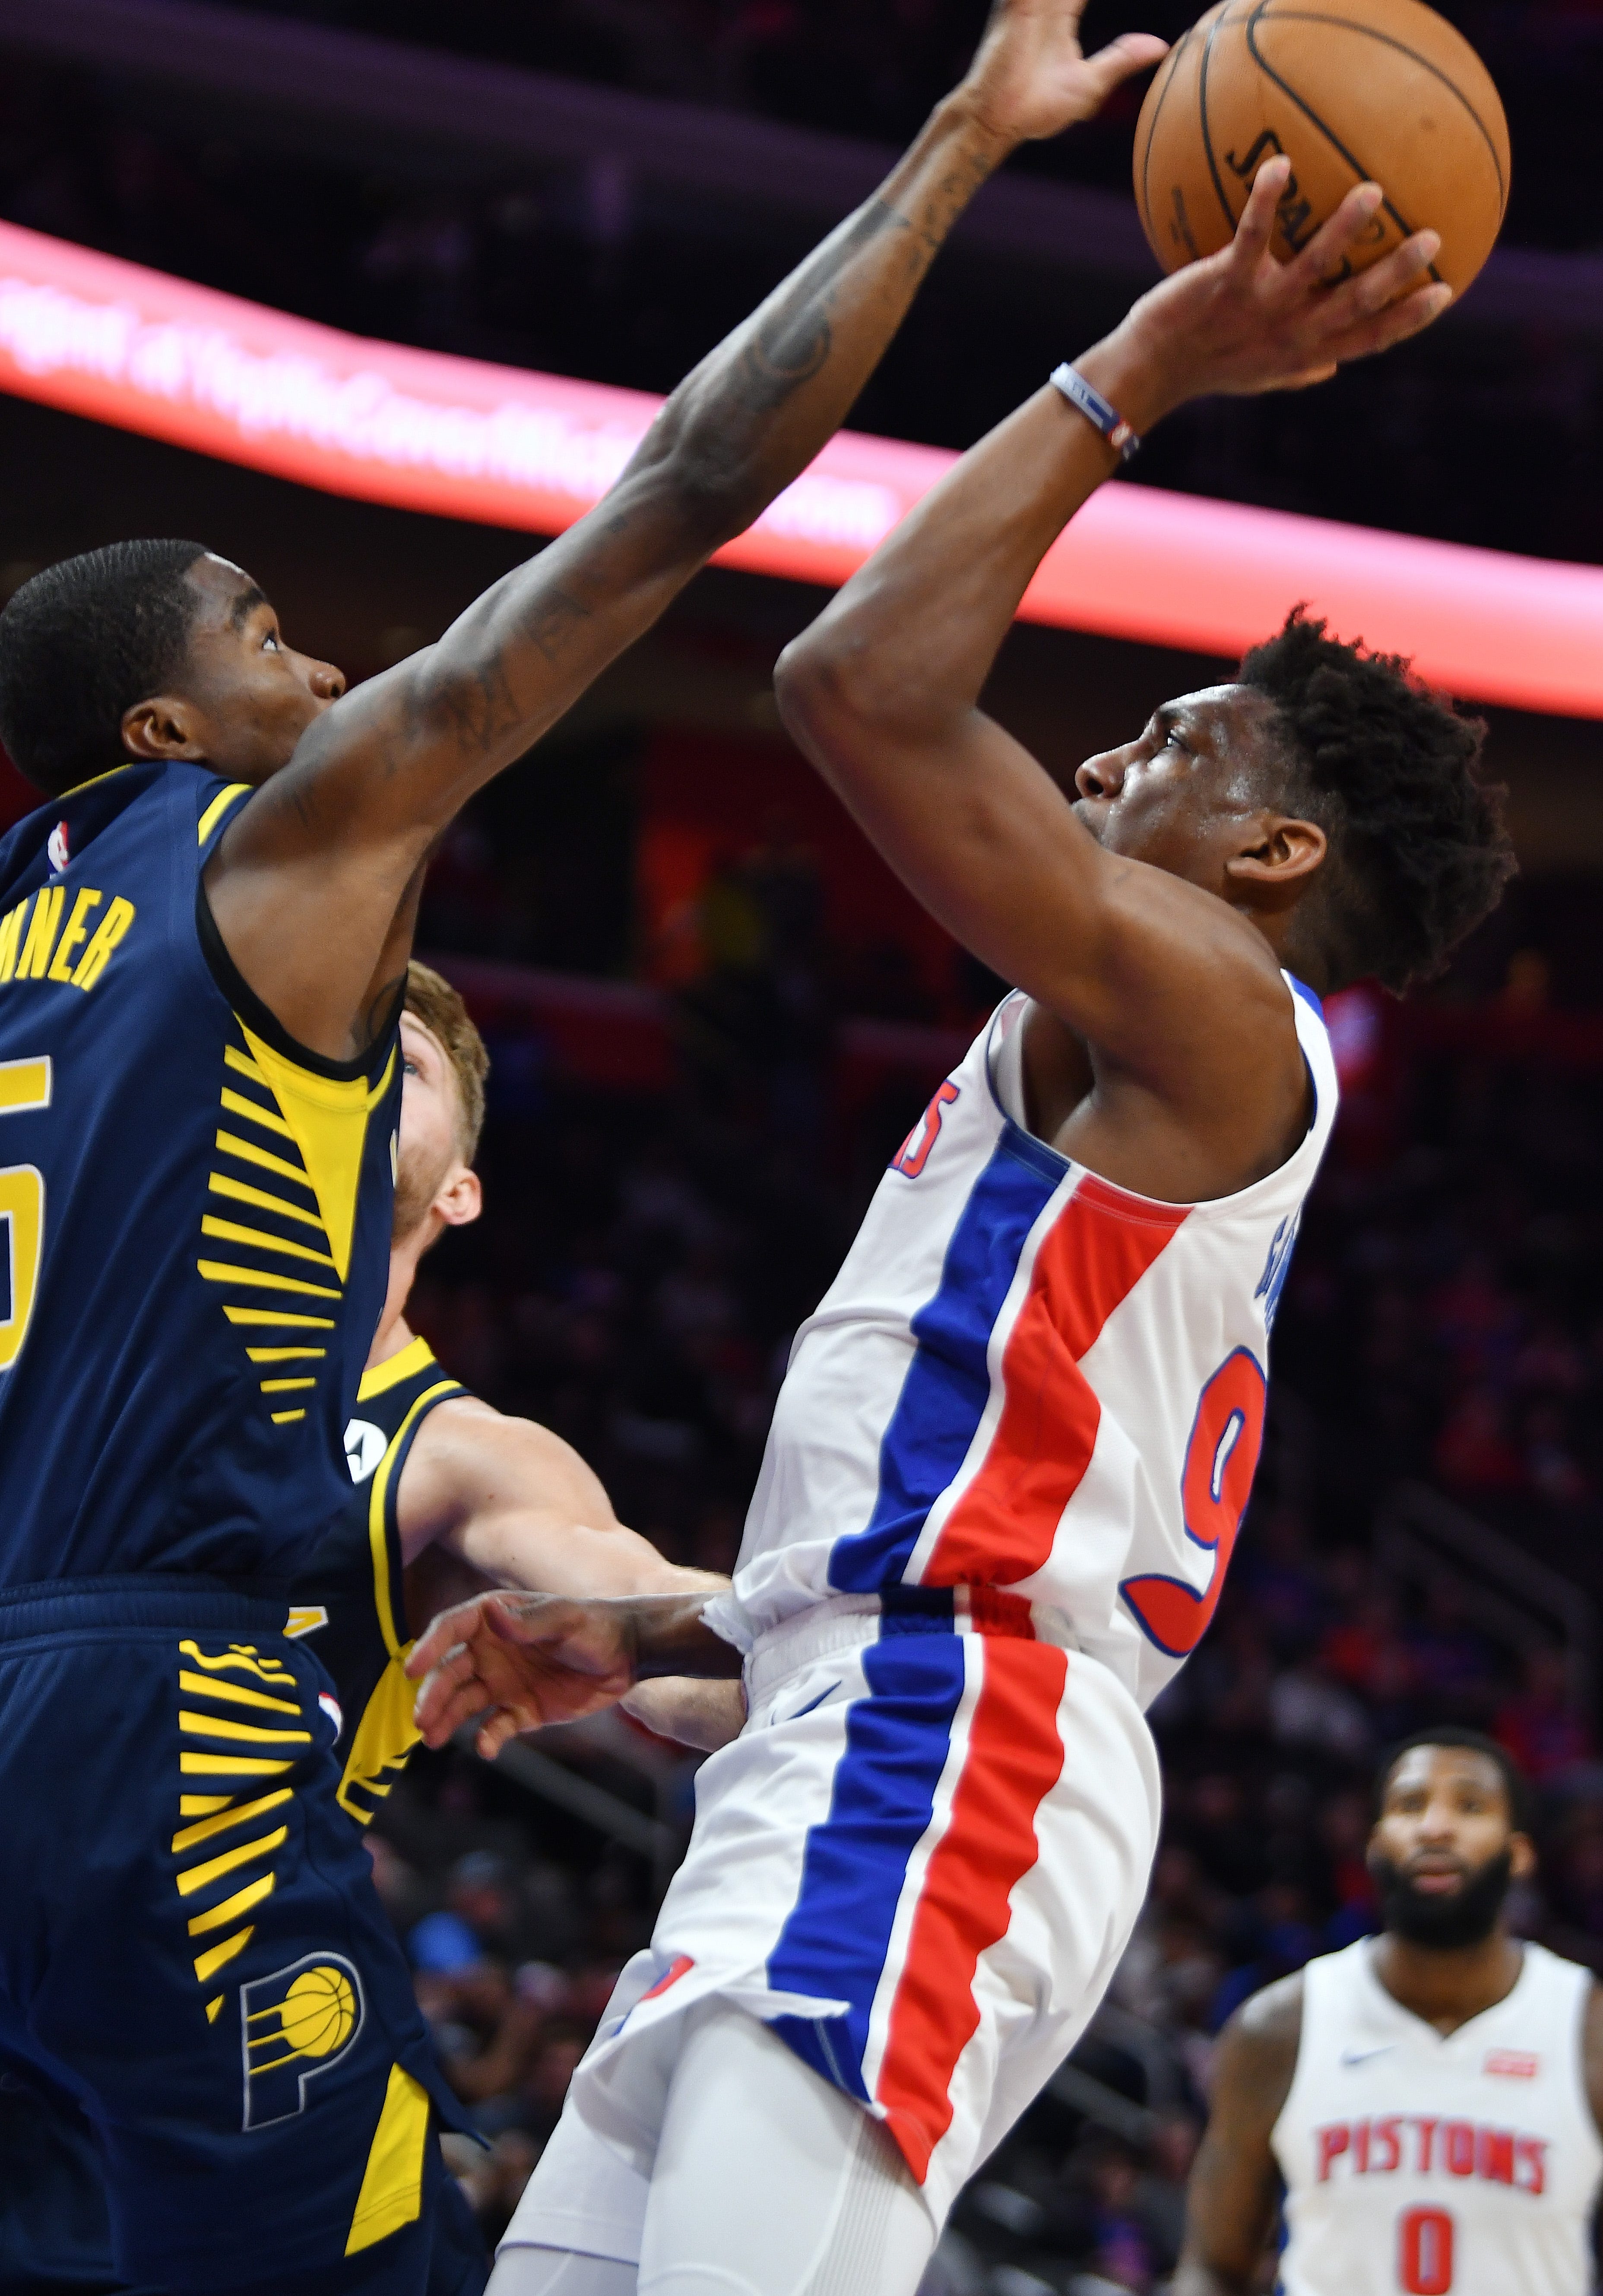 Pistons' Langston Galloway shoots over Pacers' Edmond Sumner in the second quarter.